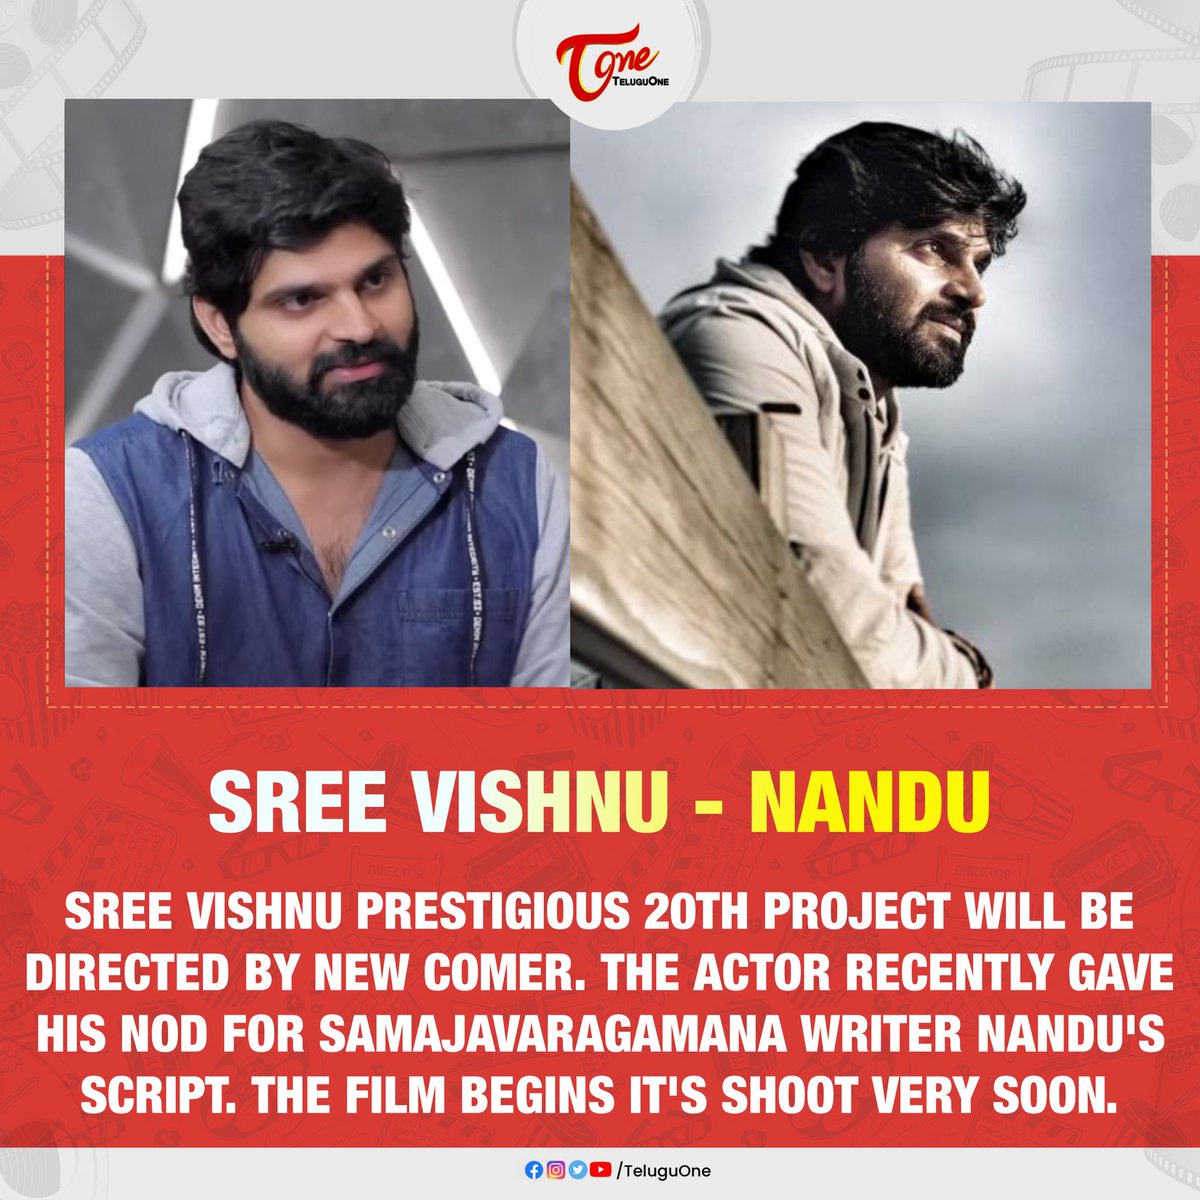 #SreeVishnu prestigious 20th project will be directed by new comer. The actor recently gave his nod for #Samajavaragamana writer #Nandu's script. The film begins it's shoot very soon.